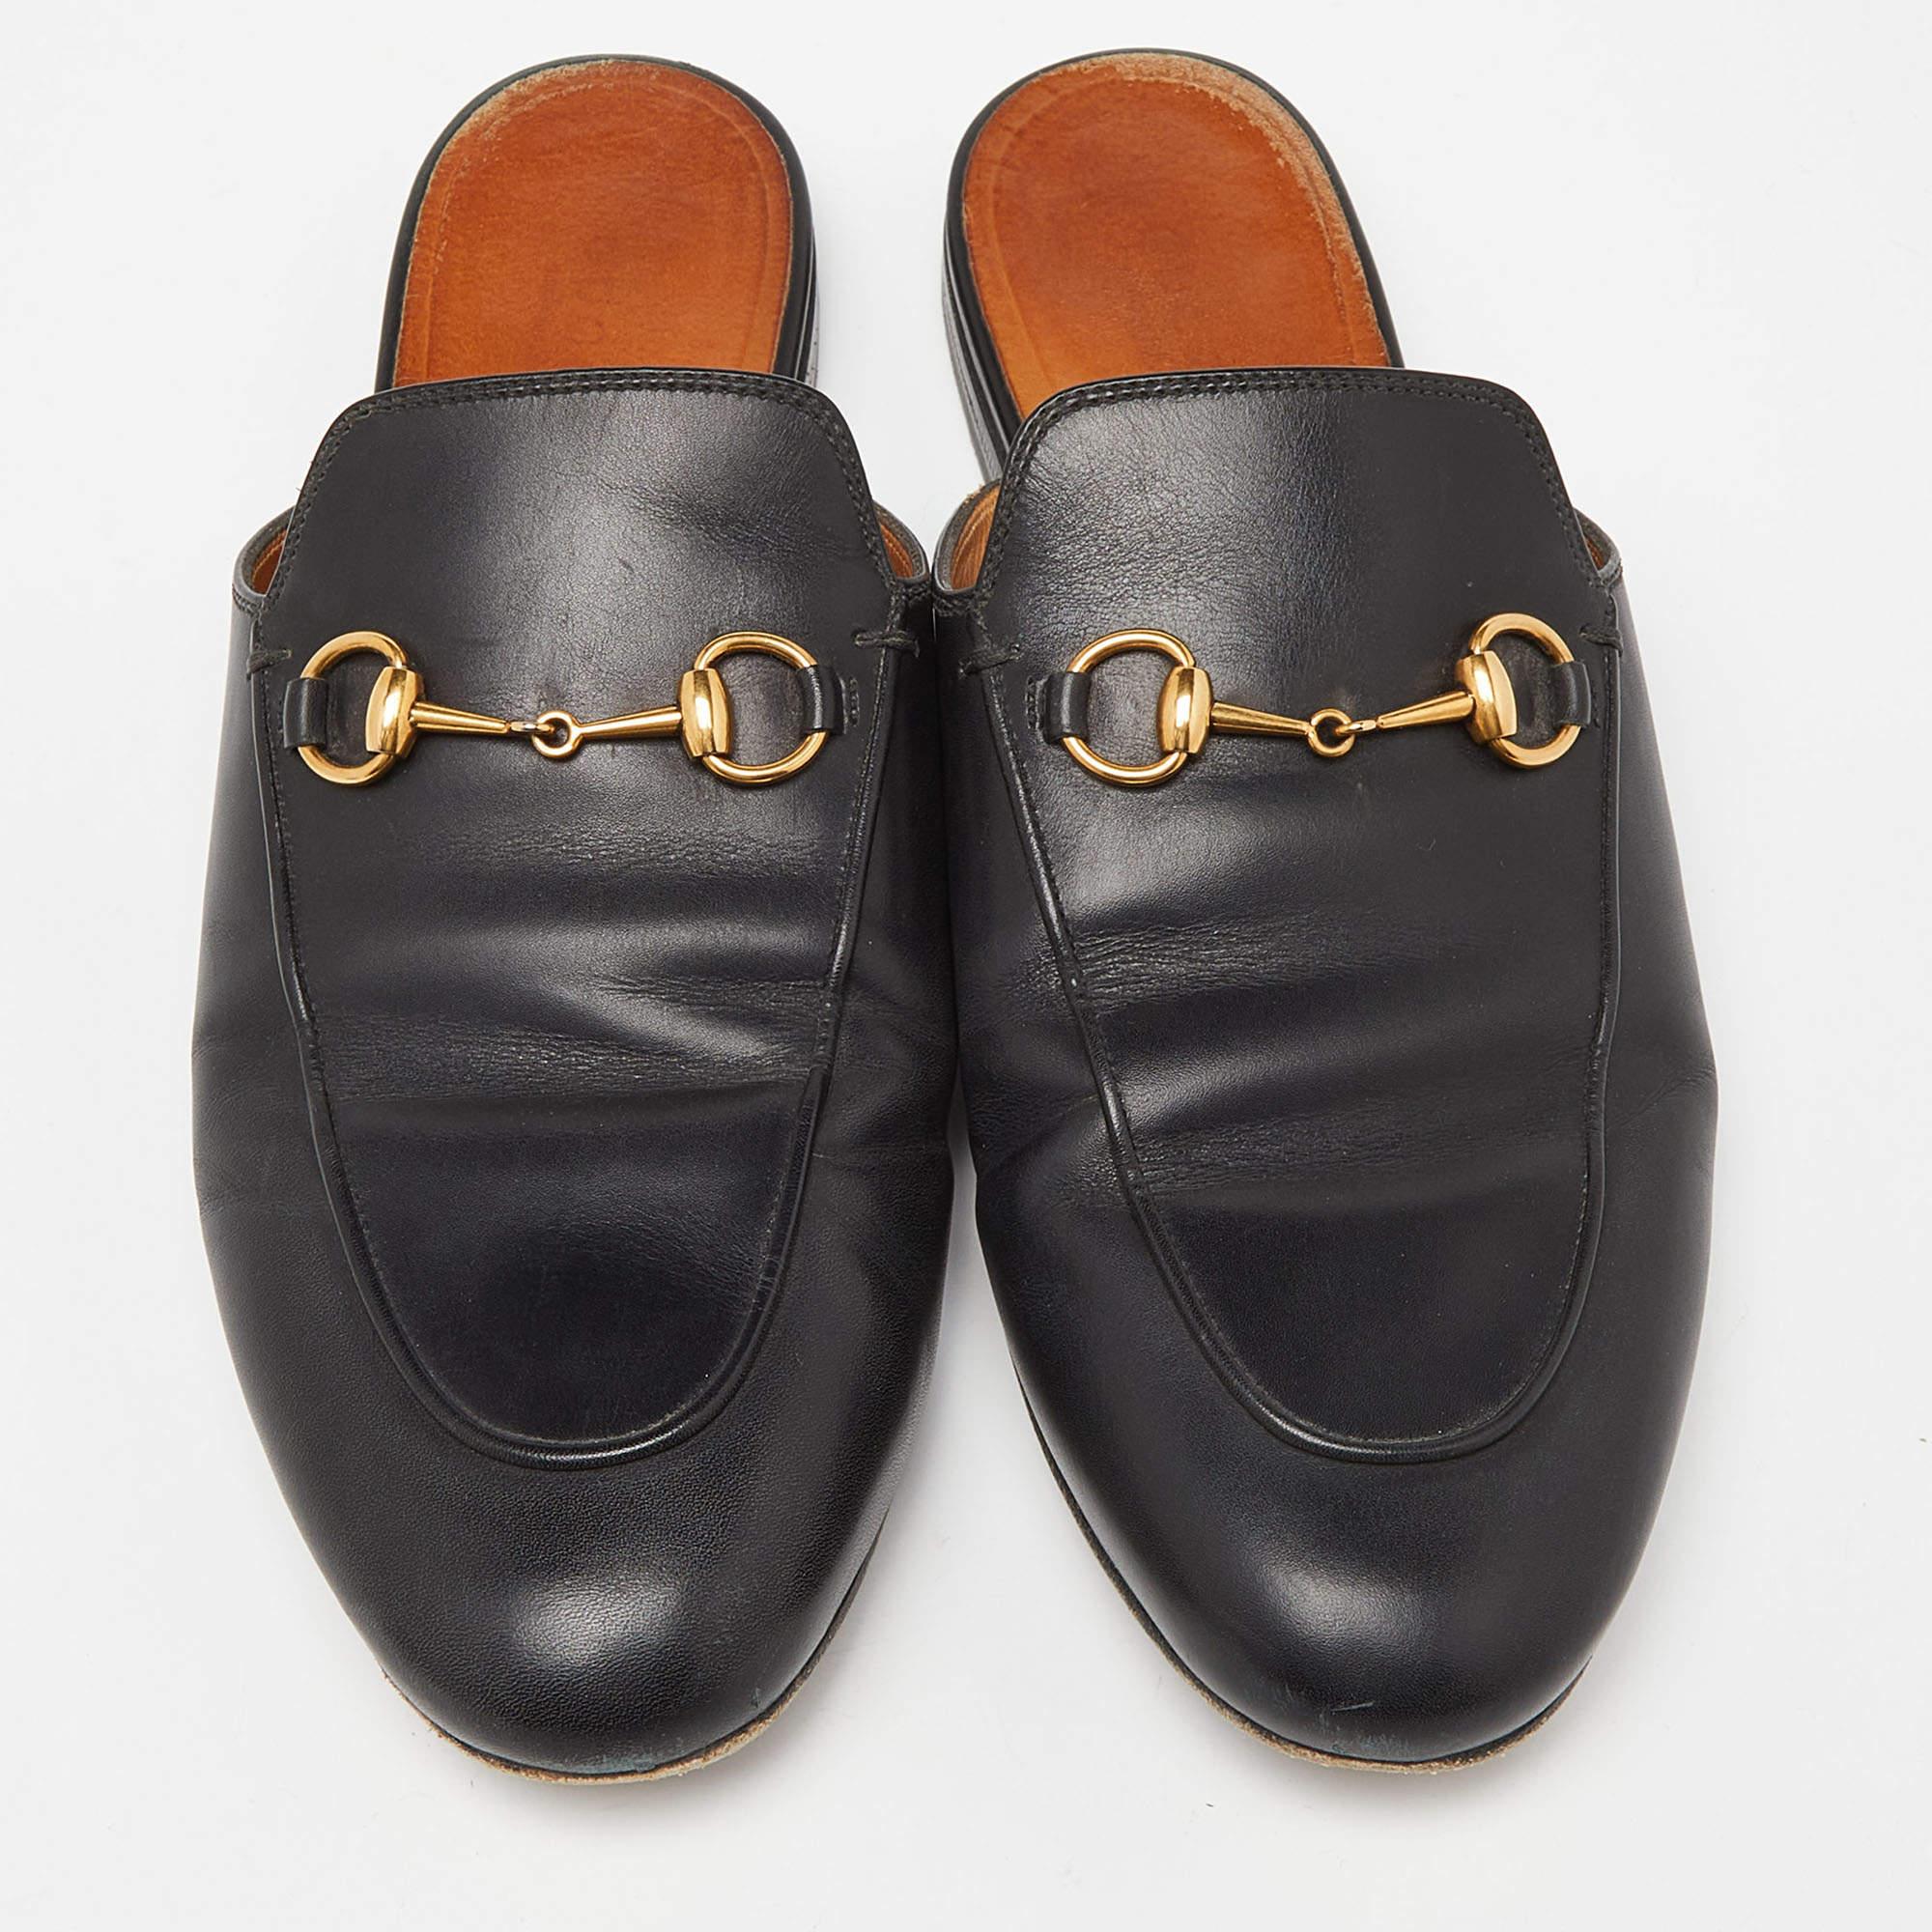 These Gucci Princetown mules signify luxury and practicality. An ultimate favourite of style enthusiasts, its silhouette gets a luxe update with the Horsebit motif on the uppers, and its charm is enhanced with gold-tone accents. It comes made from